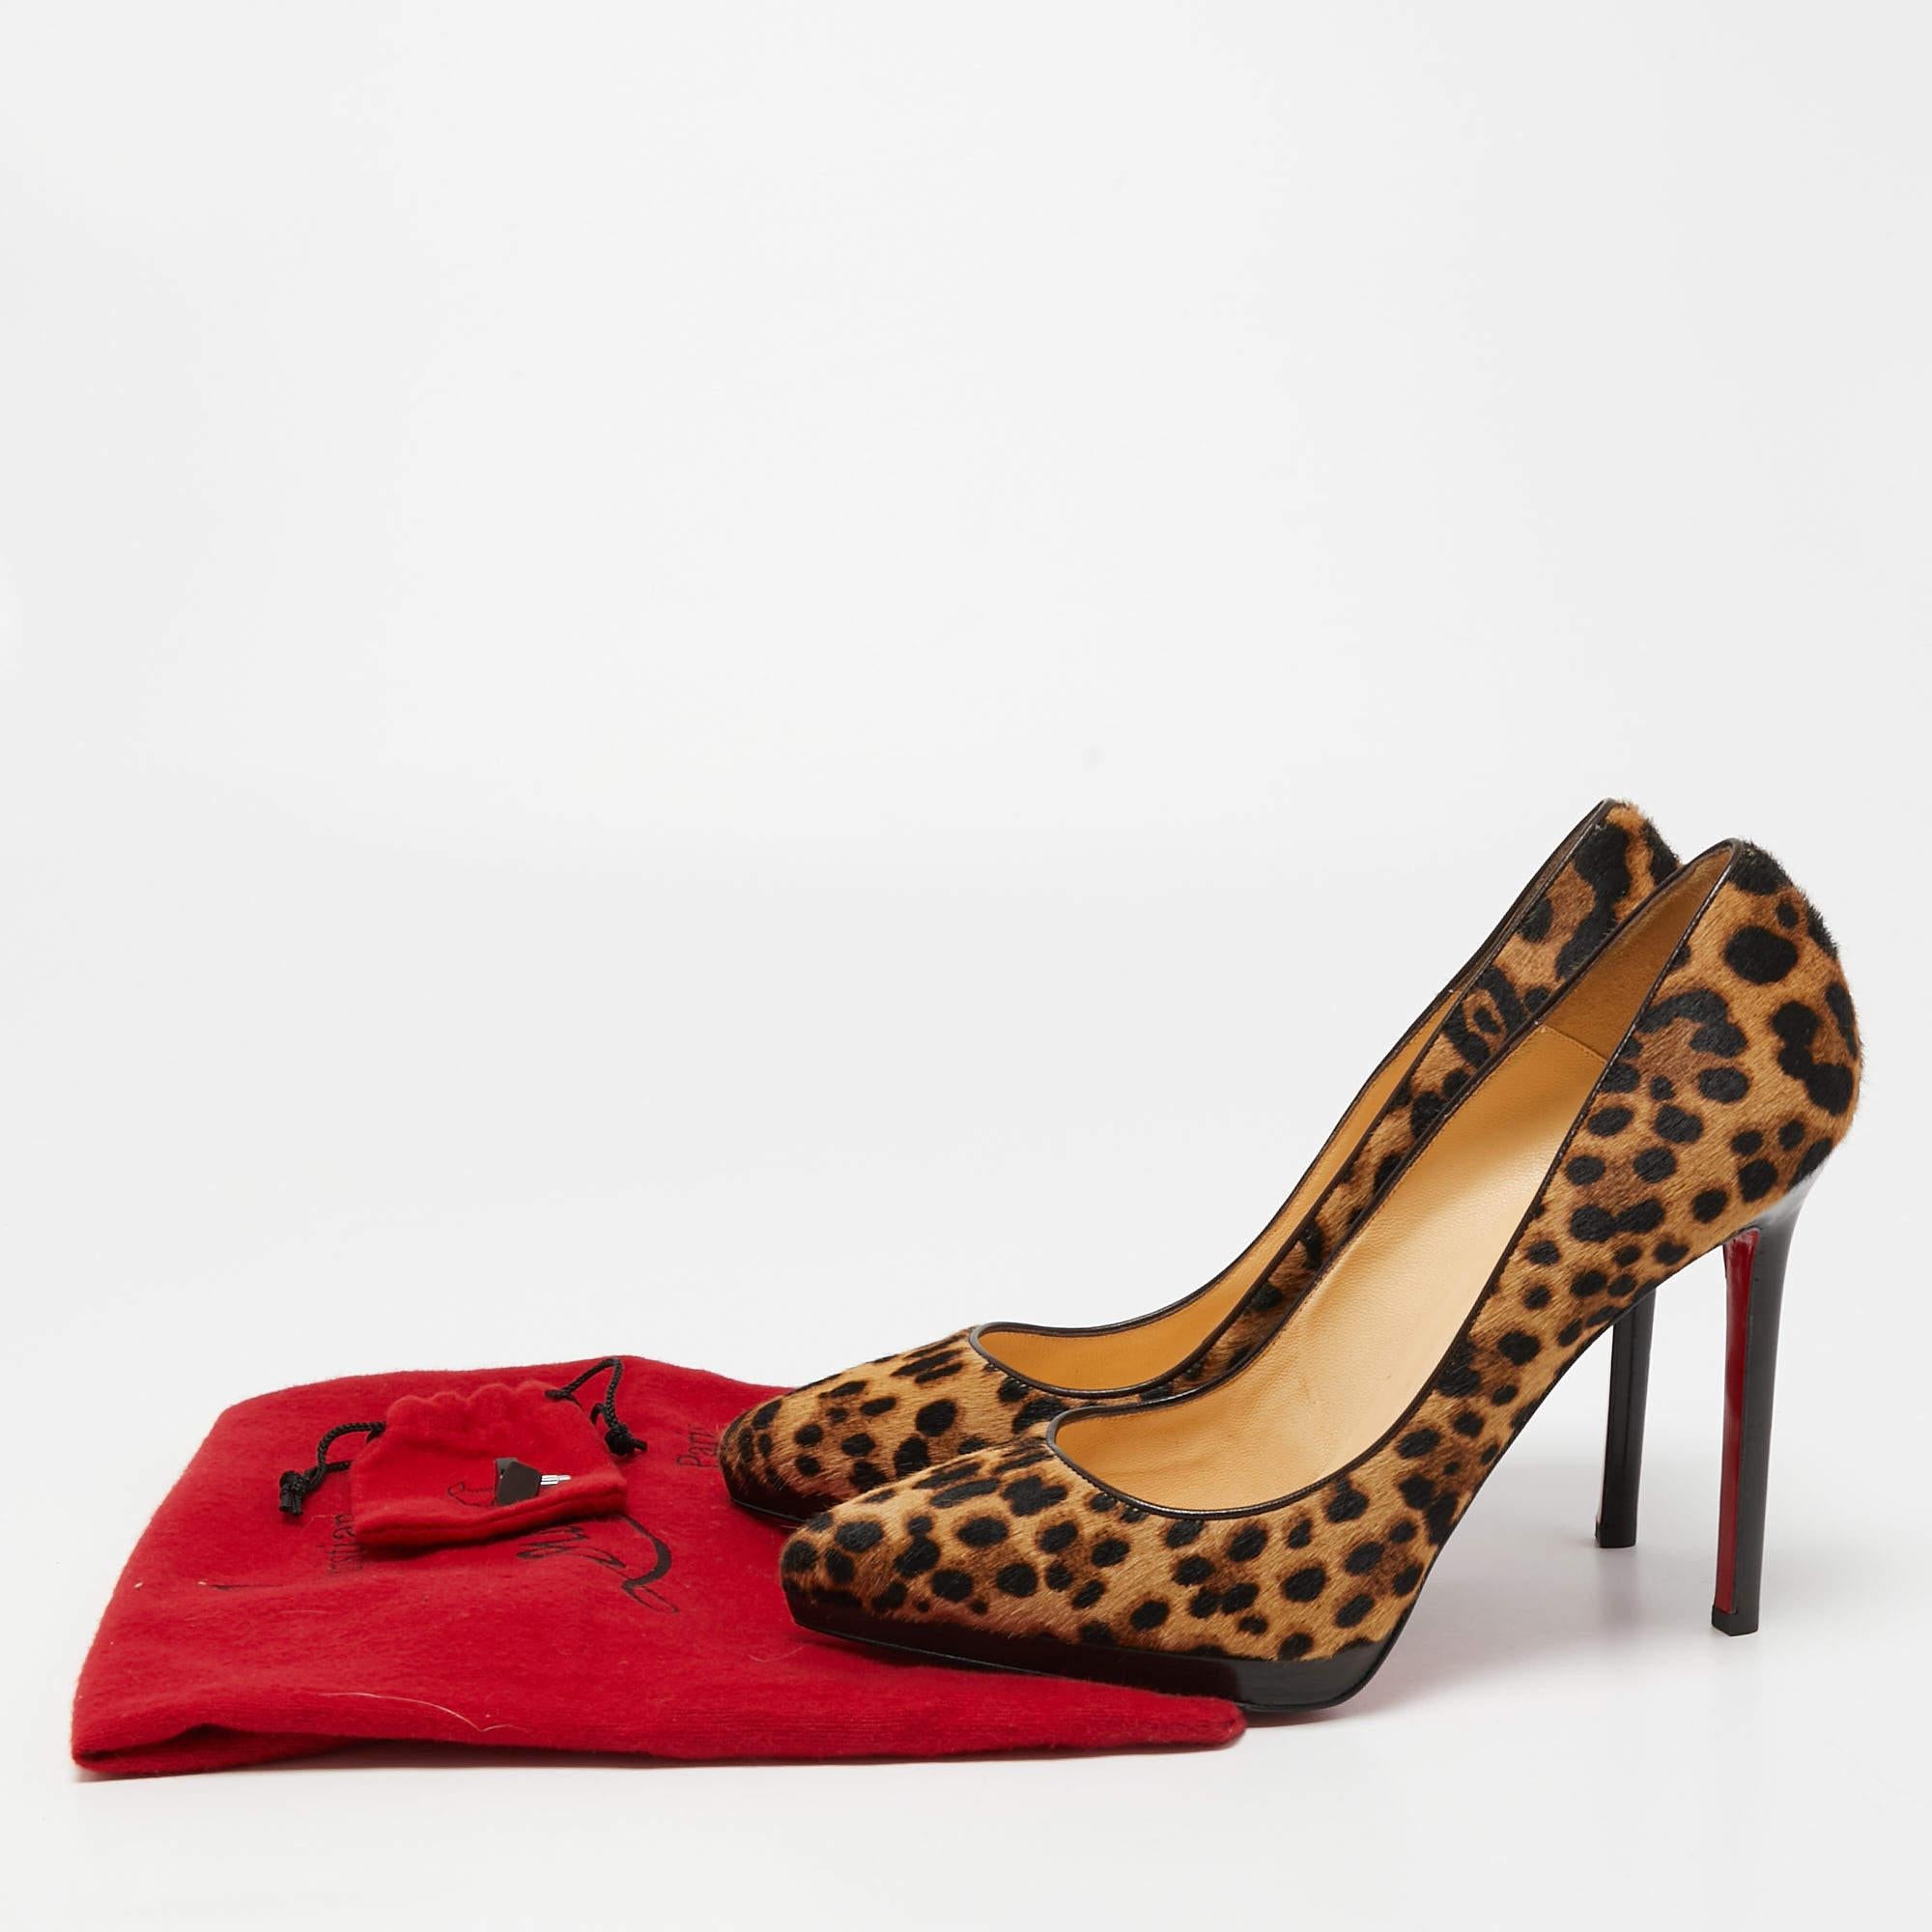 Christian Louboutin Two Tone Calf Hair Pigalle Plato Pumps Size 39.5 4